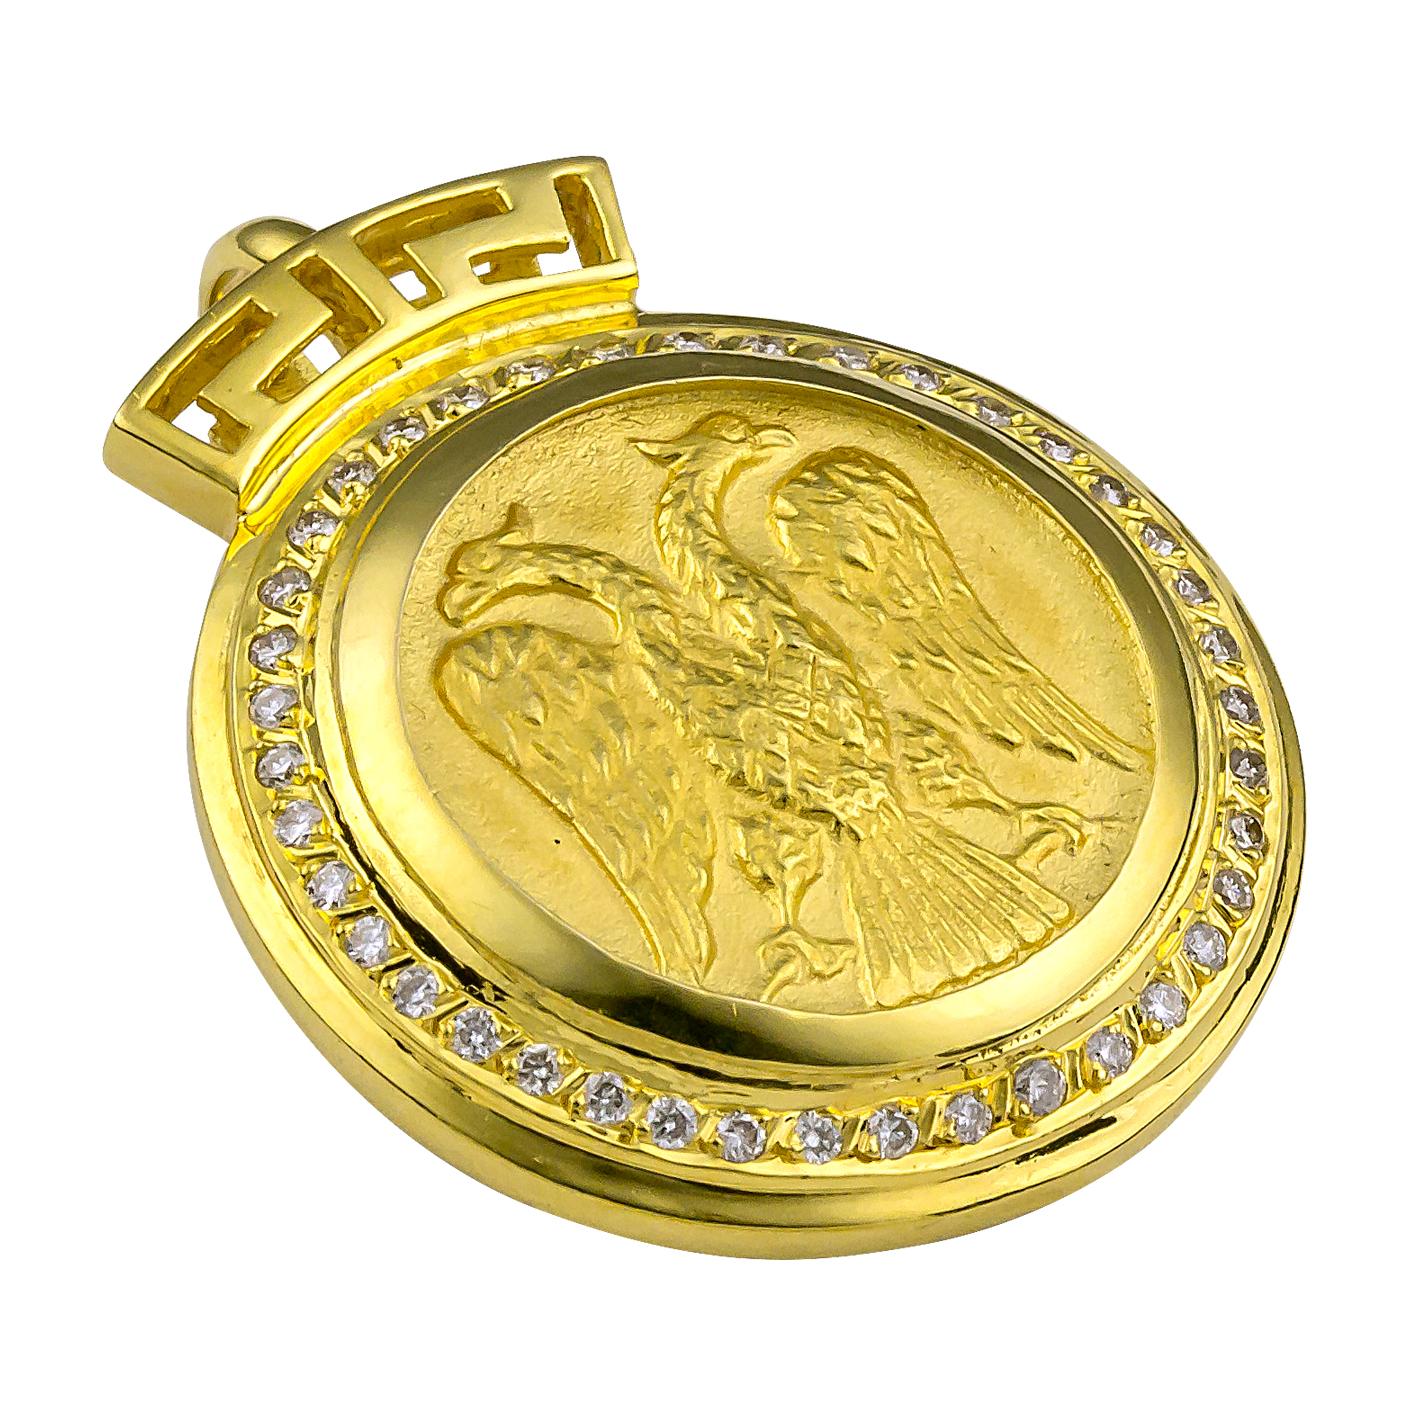 S.Georgios designer 18 Karat Yellow Gold Double-Headed Eagle Diamond Coin Pendant is all handmade and feature Brilliant cut Diamonds around the coin total weight of 0,48 Carats. On the top of the bezel, we have set the Greek Design symbol to give it